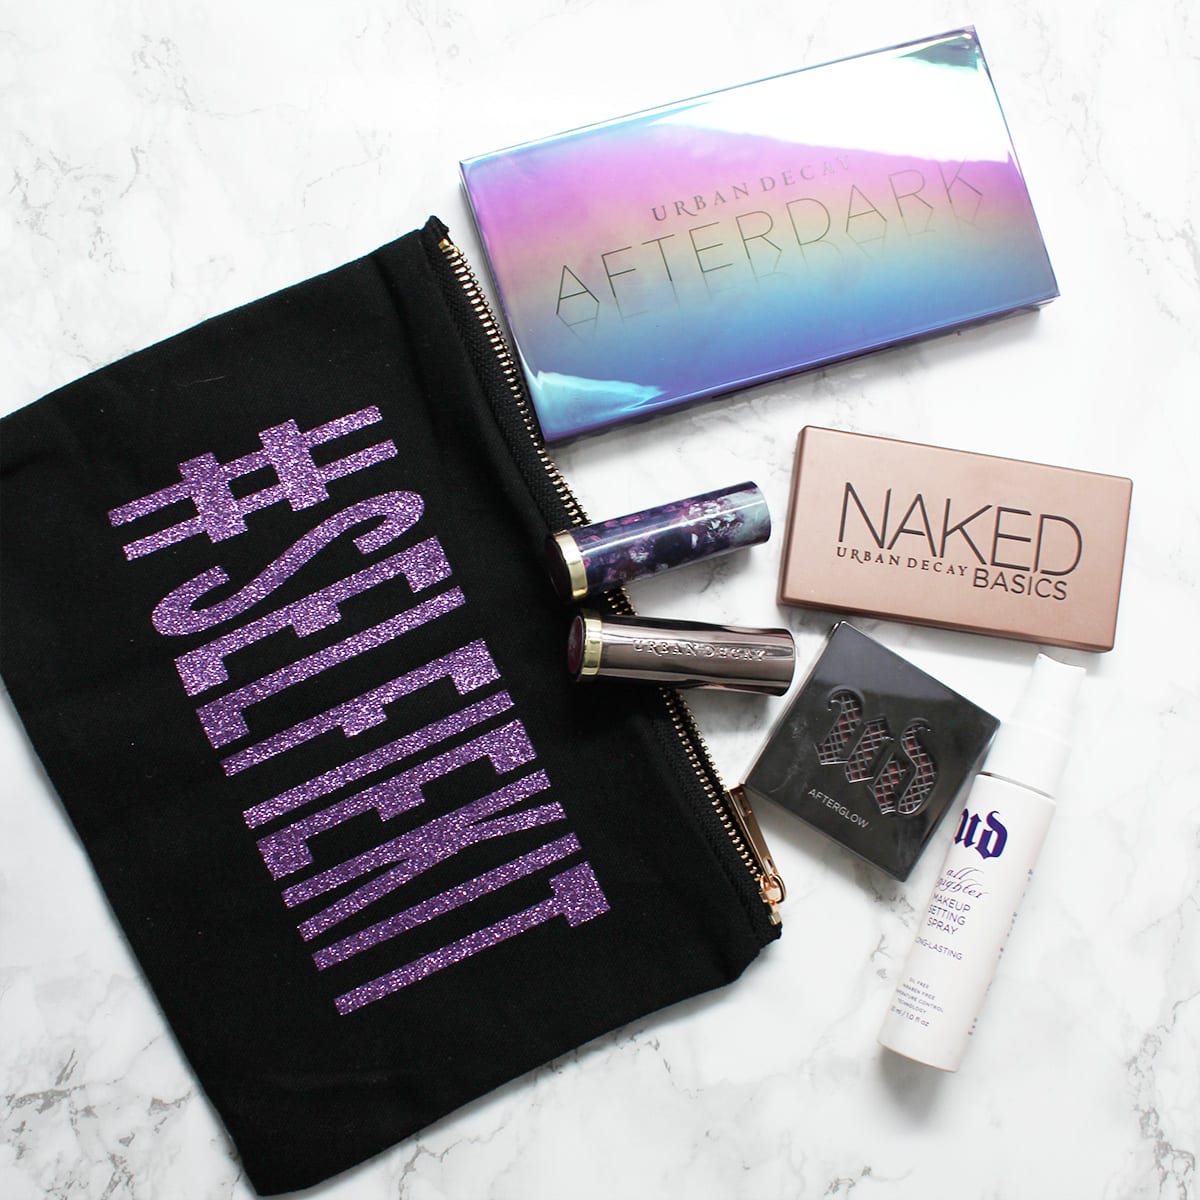 Top 5 Favorites from Urban Decay